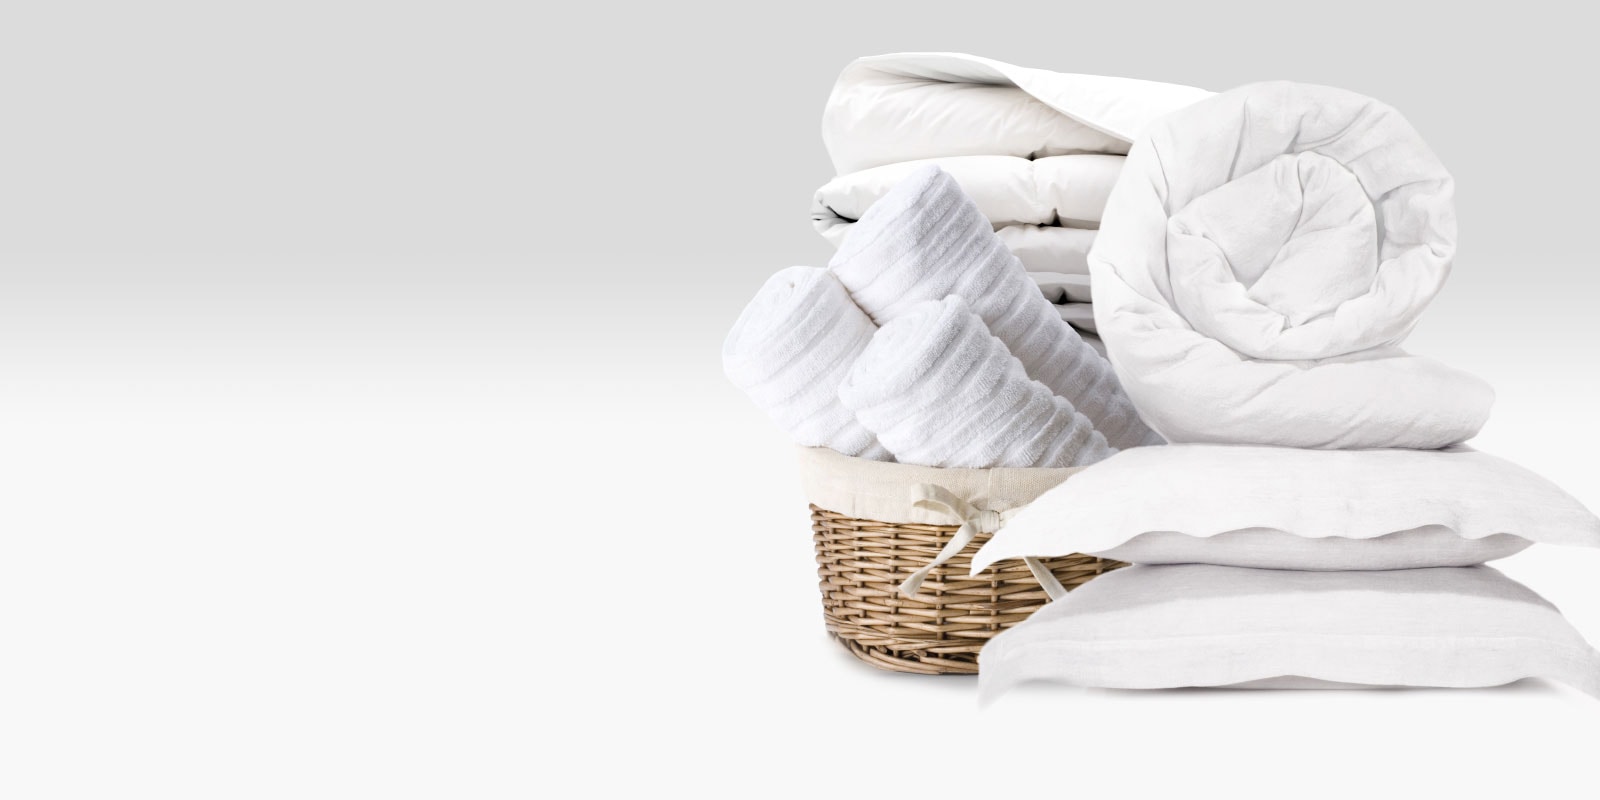 Get It All Done In Less Time - Basket of clean white towels